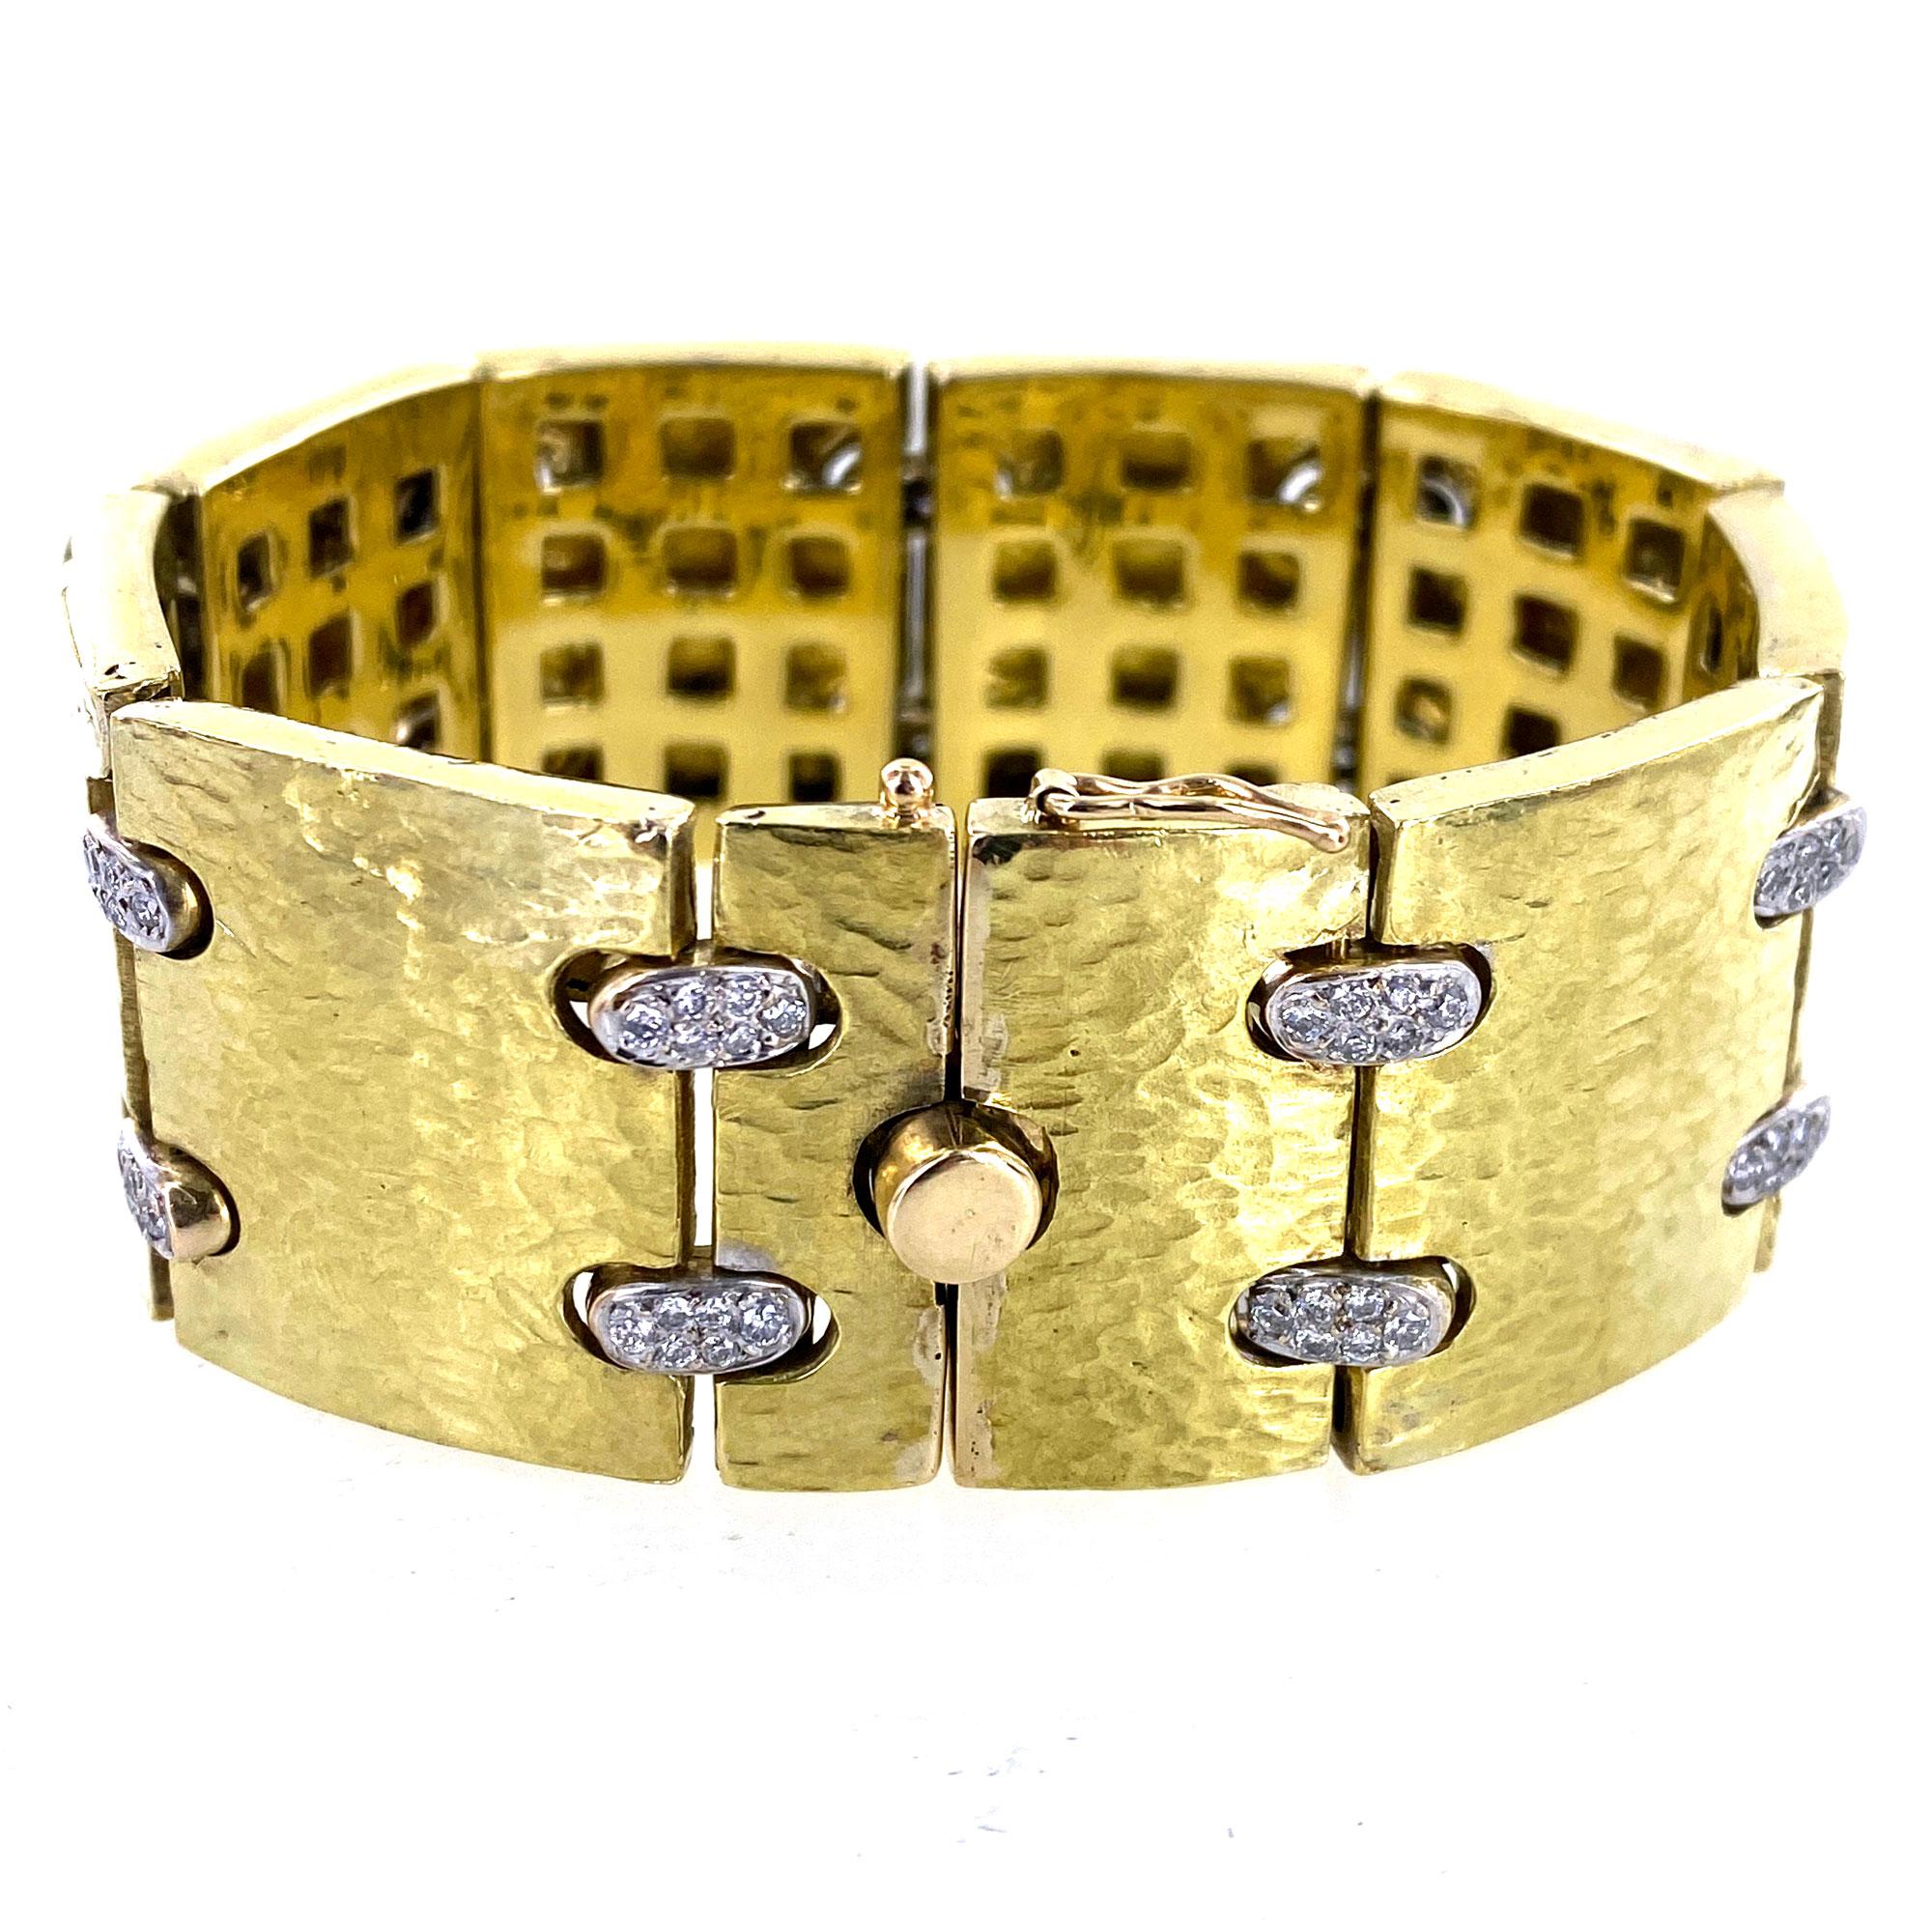 Fabulous hammered satin finish 18 karat yellow gold bracelet connected by diamond links in 18 karat white gold. The diamonds weigh approximately 1.50 carat total weight. The solid gold bracelet measures 7.5 inches in length and 1.0 inch in width. 